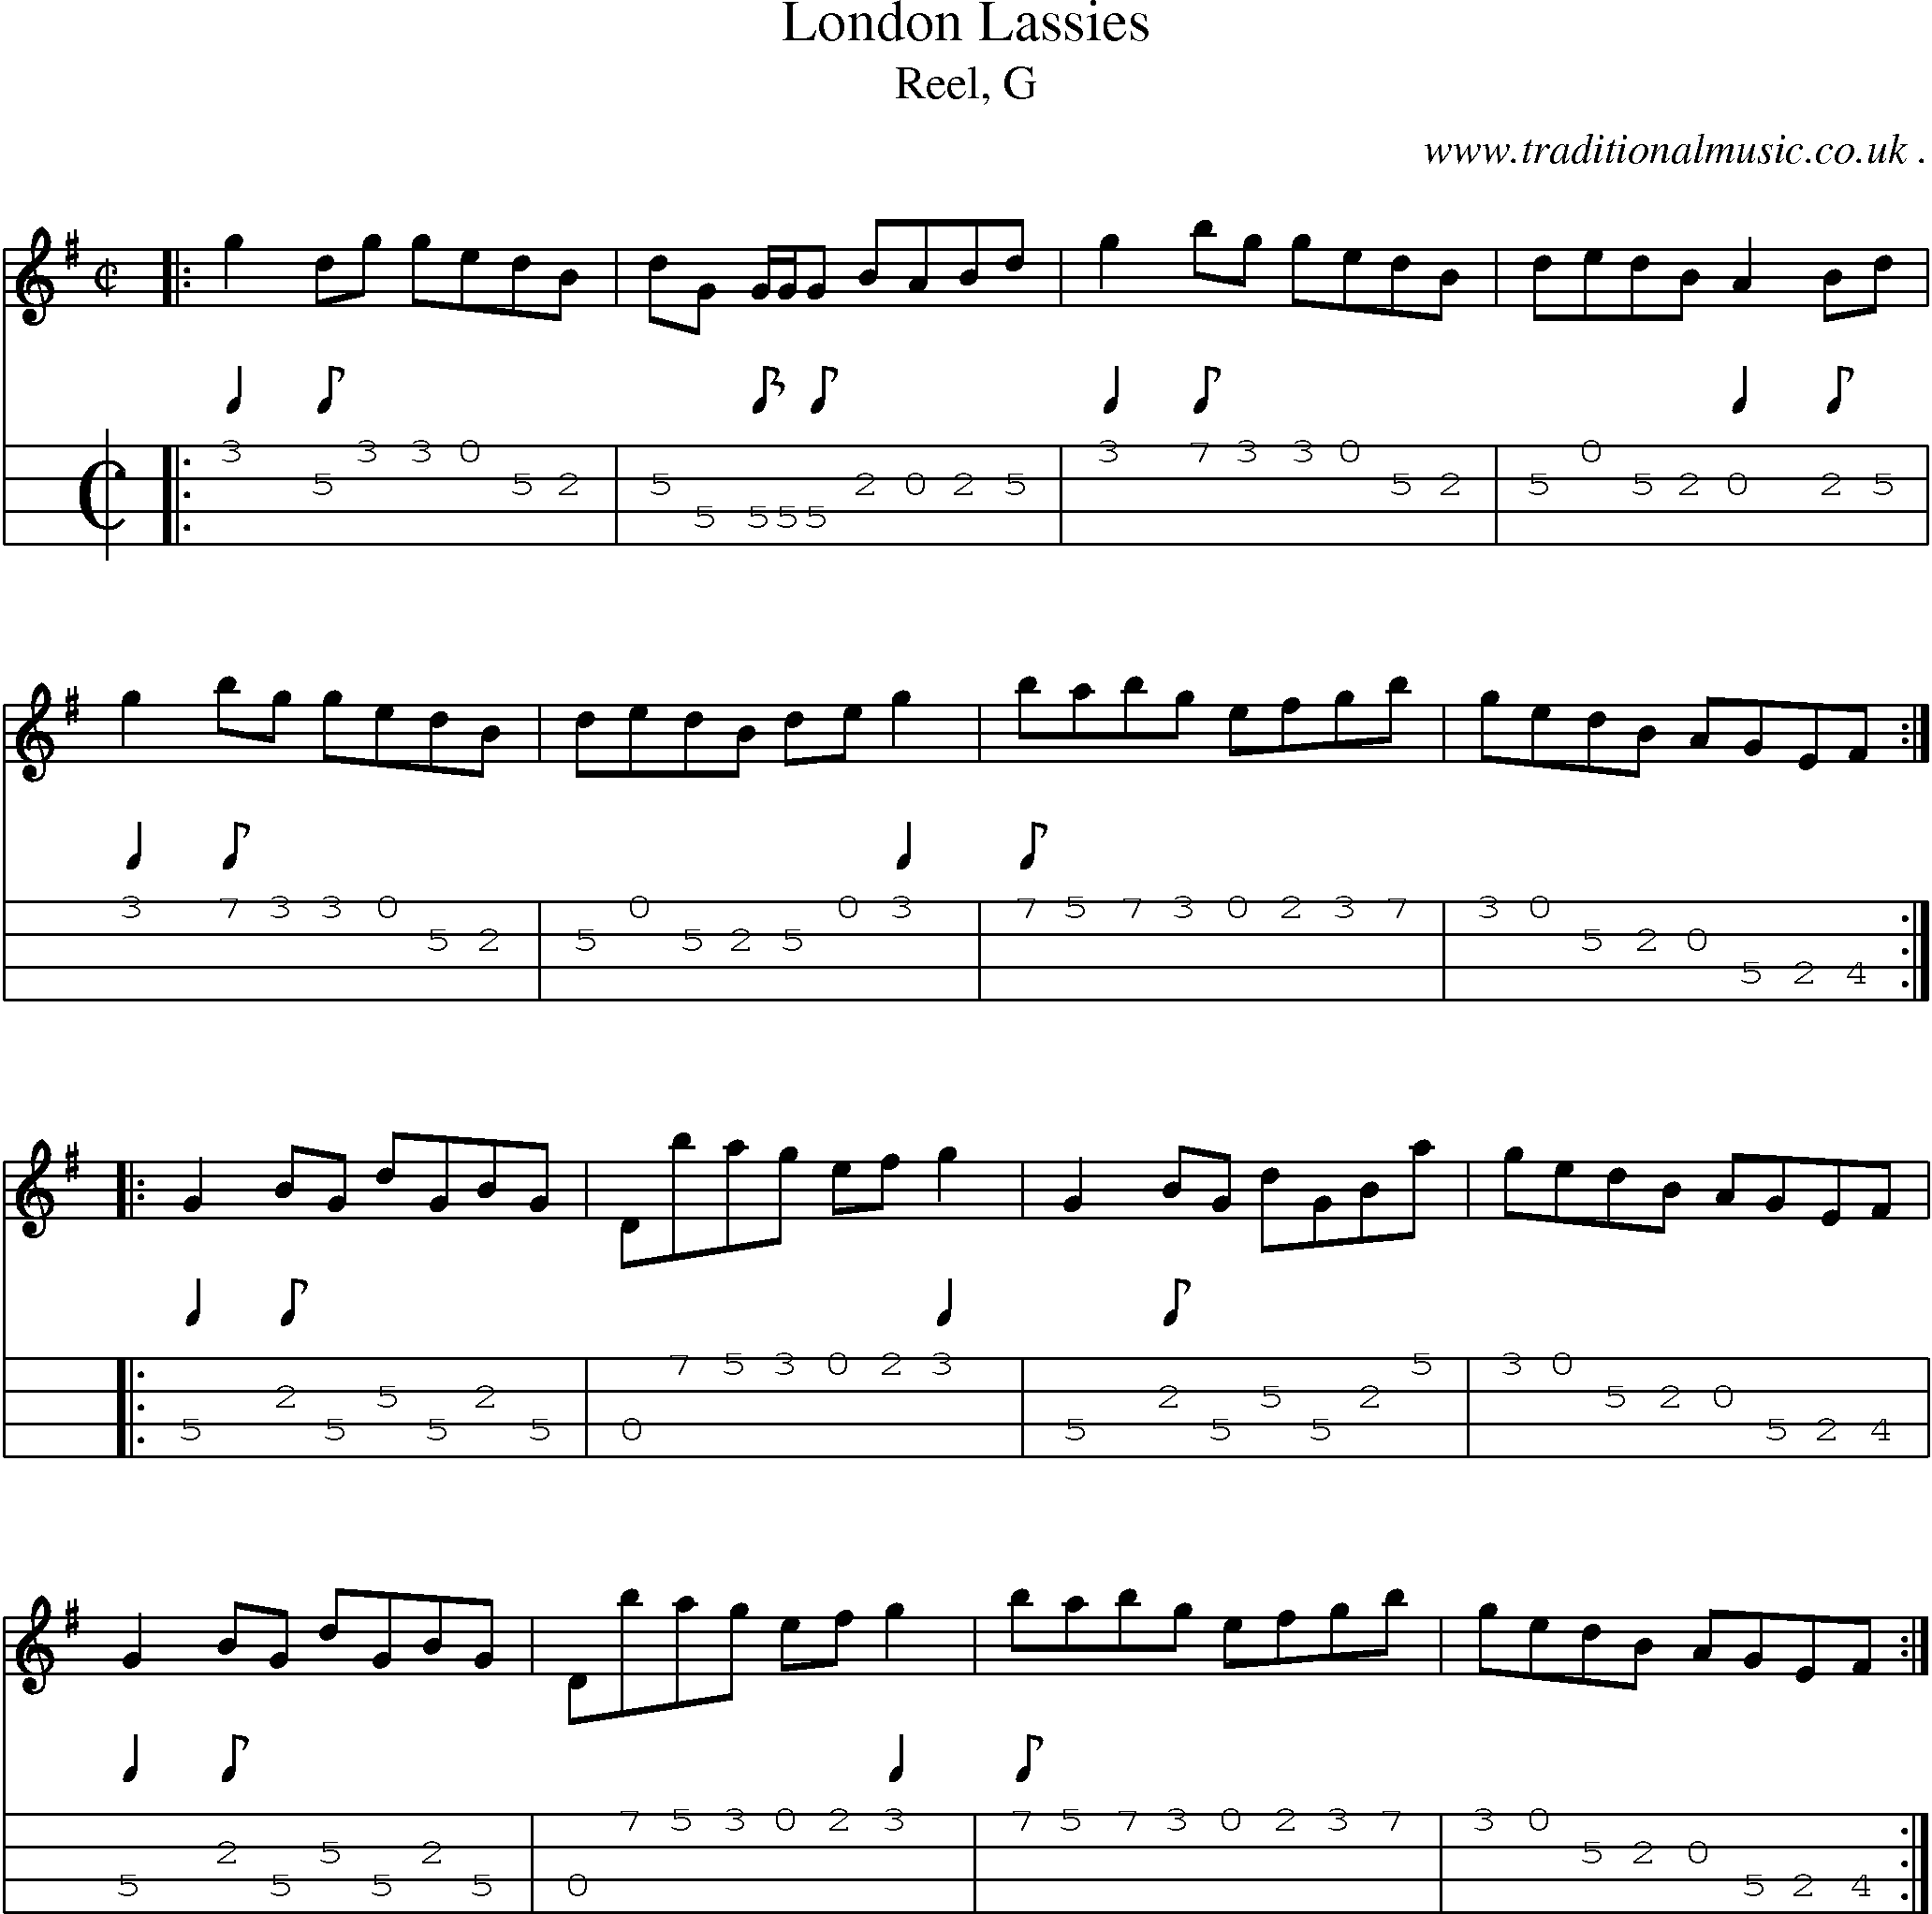 Sheet-music  score, Chords and Mandolin Tabs for London Lassies